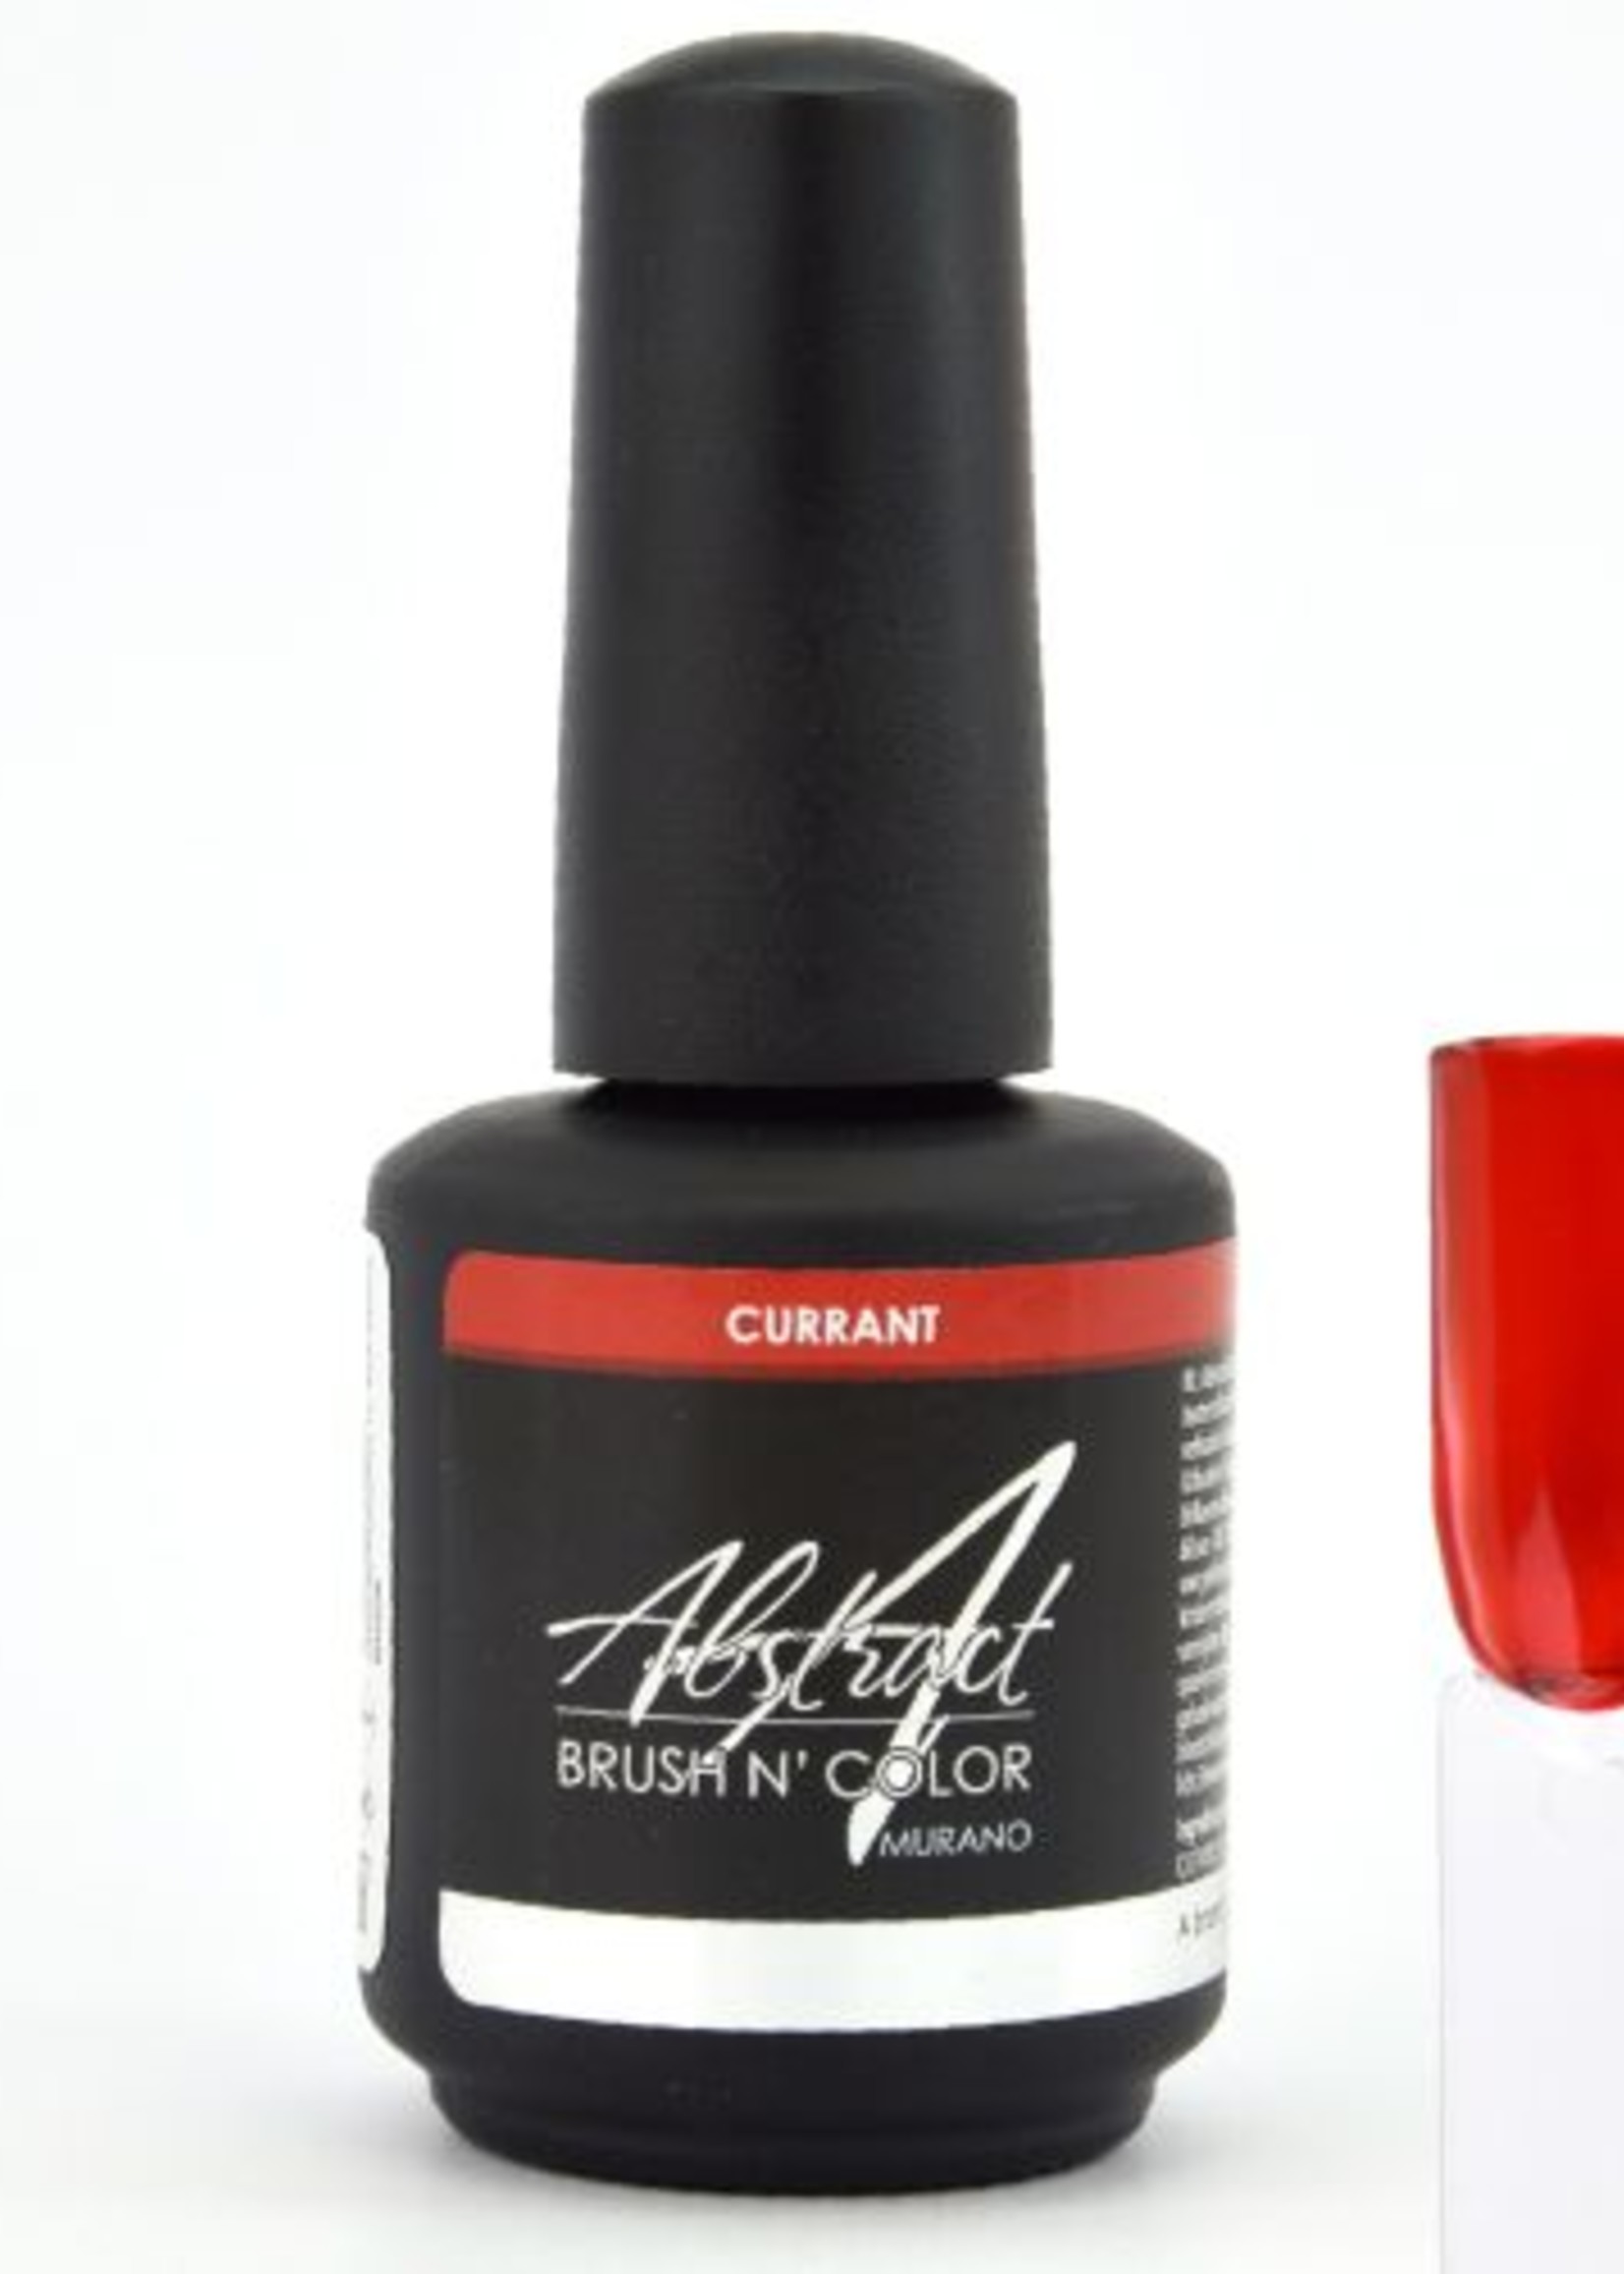 Abstract® Brush N' Color Murano 15 ml Currant